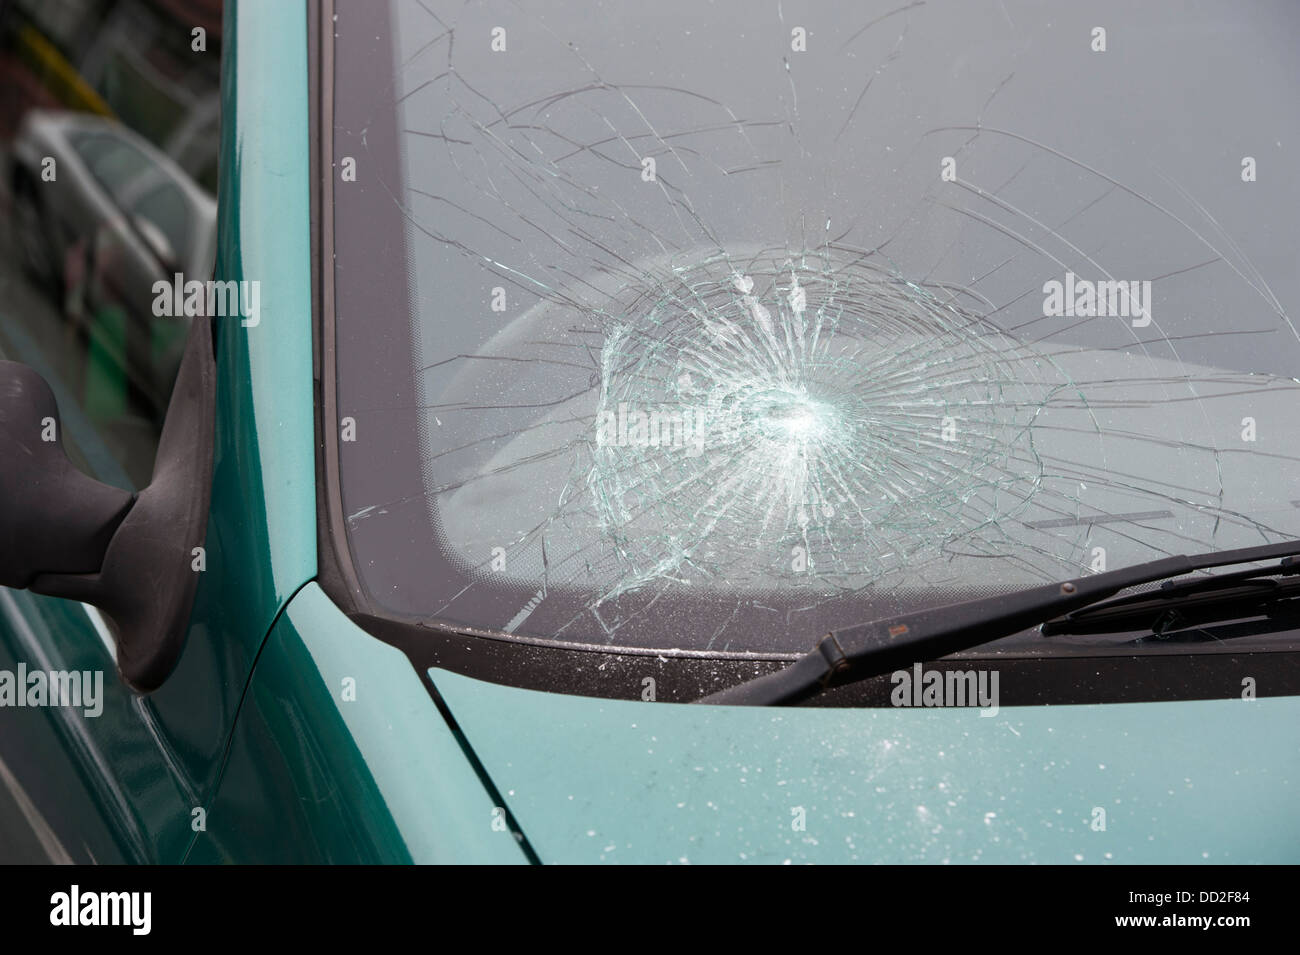 car accident smashed windshield or windscreen Stock Photo